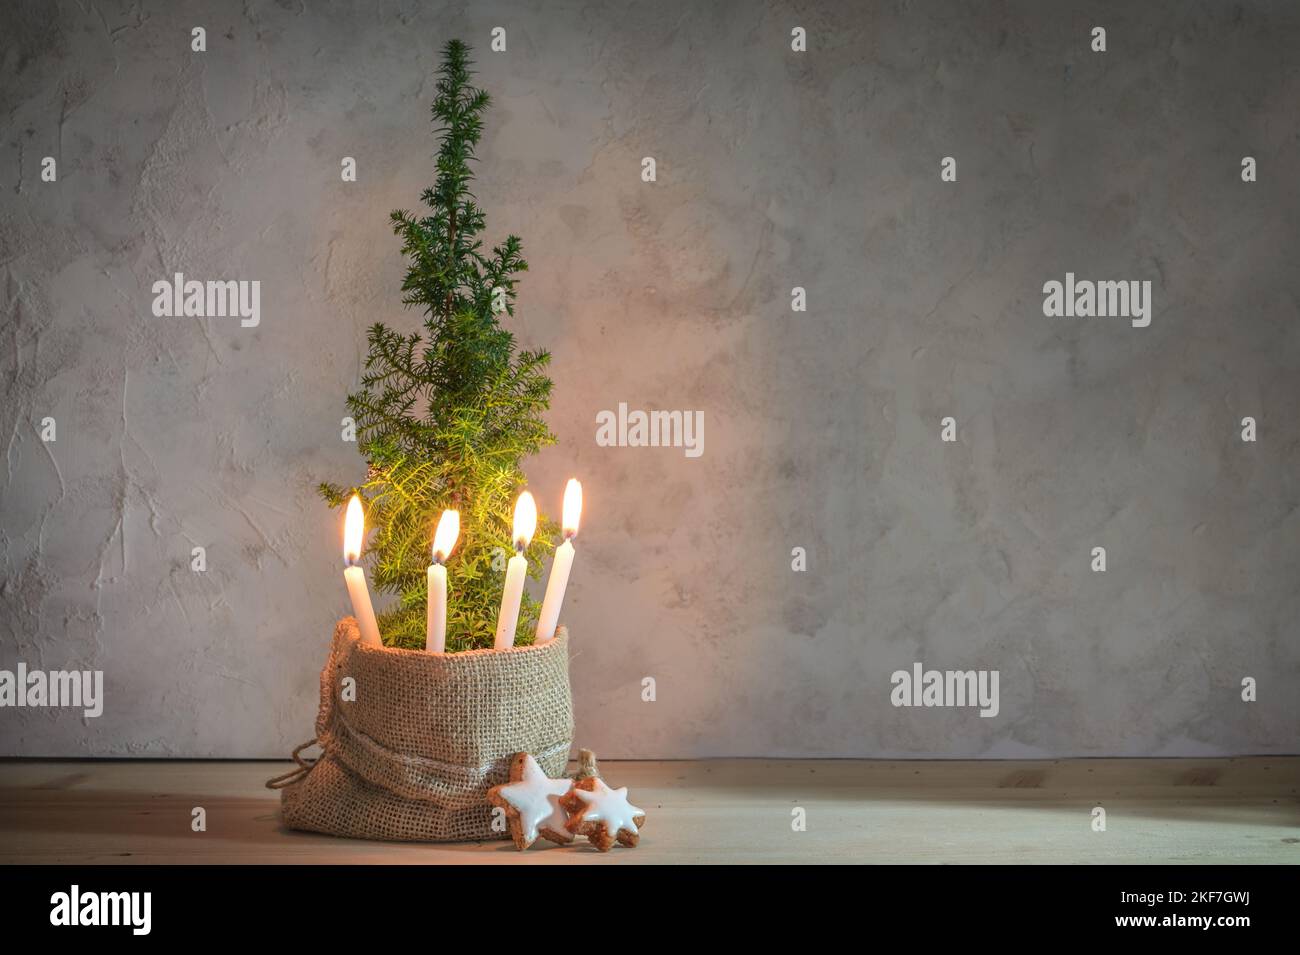 Alternative Advent wreath, four candles lit with a flame on a small conifer plant as Christmas tree symbol, large copy space Stock Photo